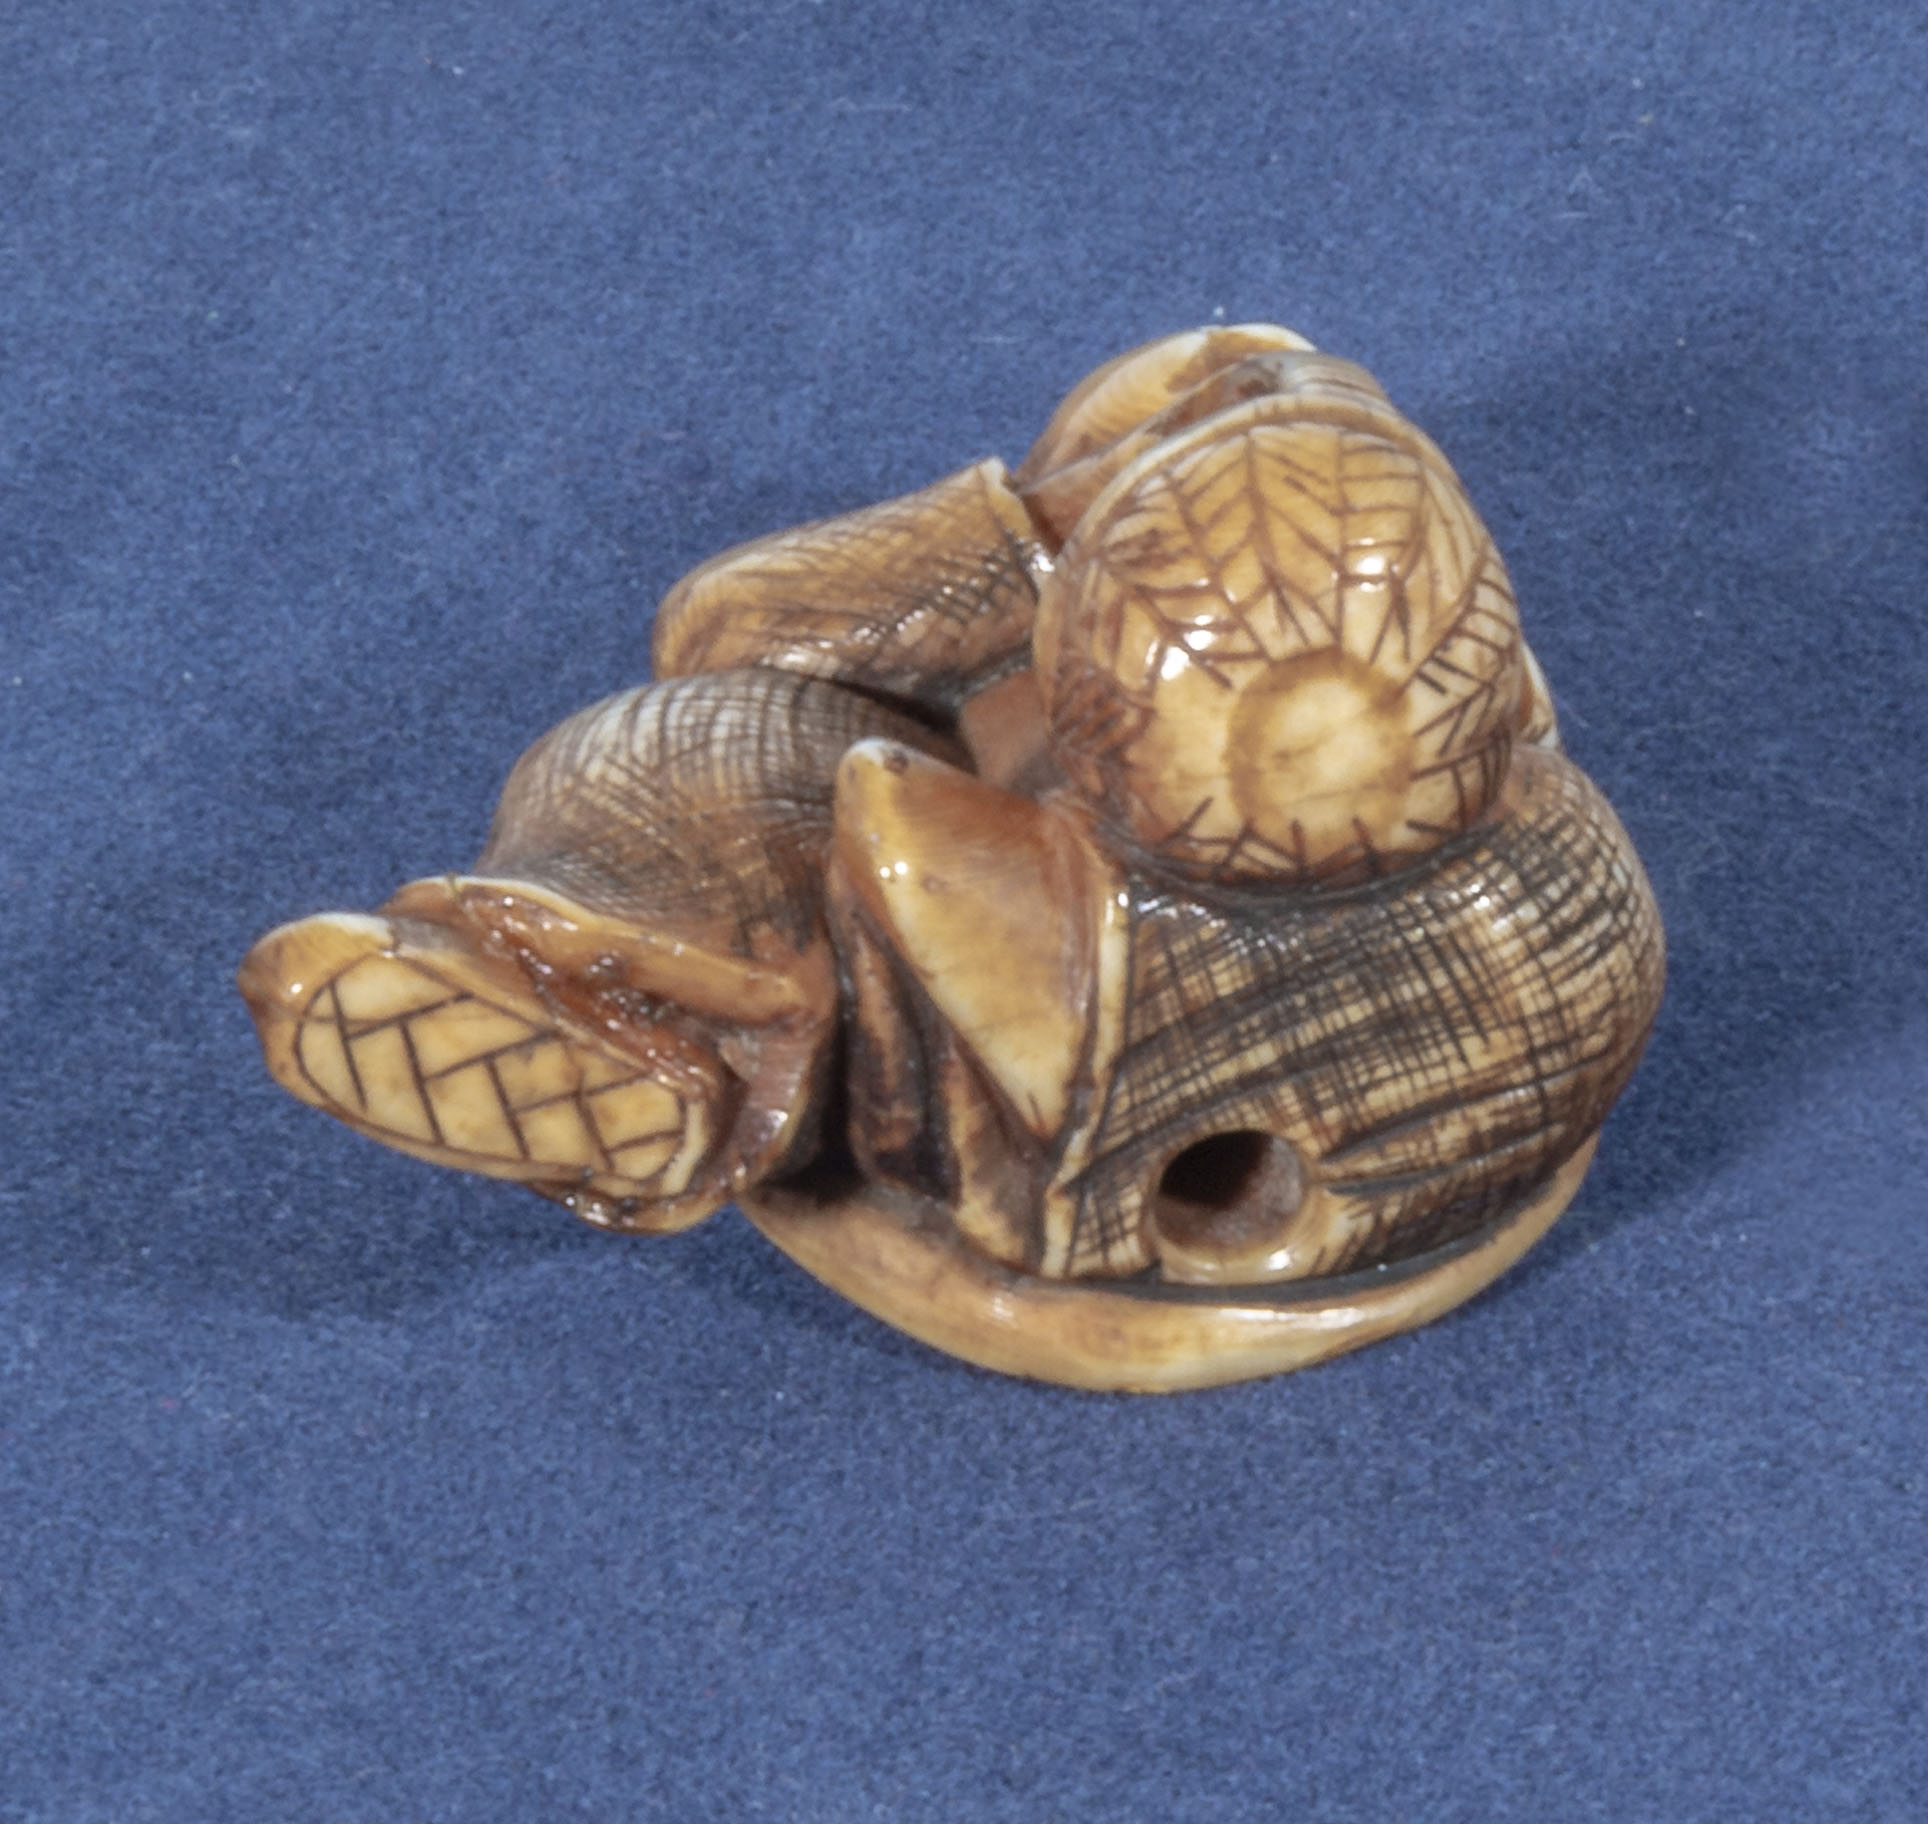 An antique netsuke depicting a man with small horn roundells onlaid on his head carrying a basket, - Image 3 of 3